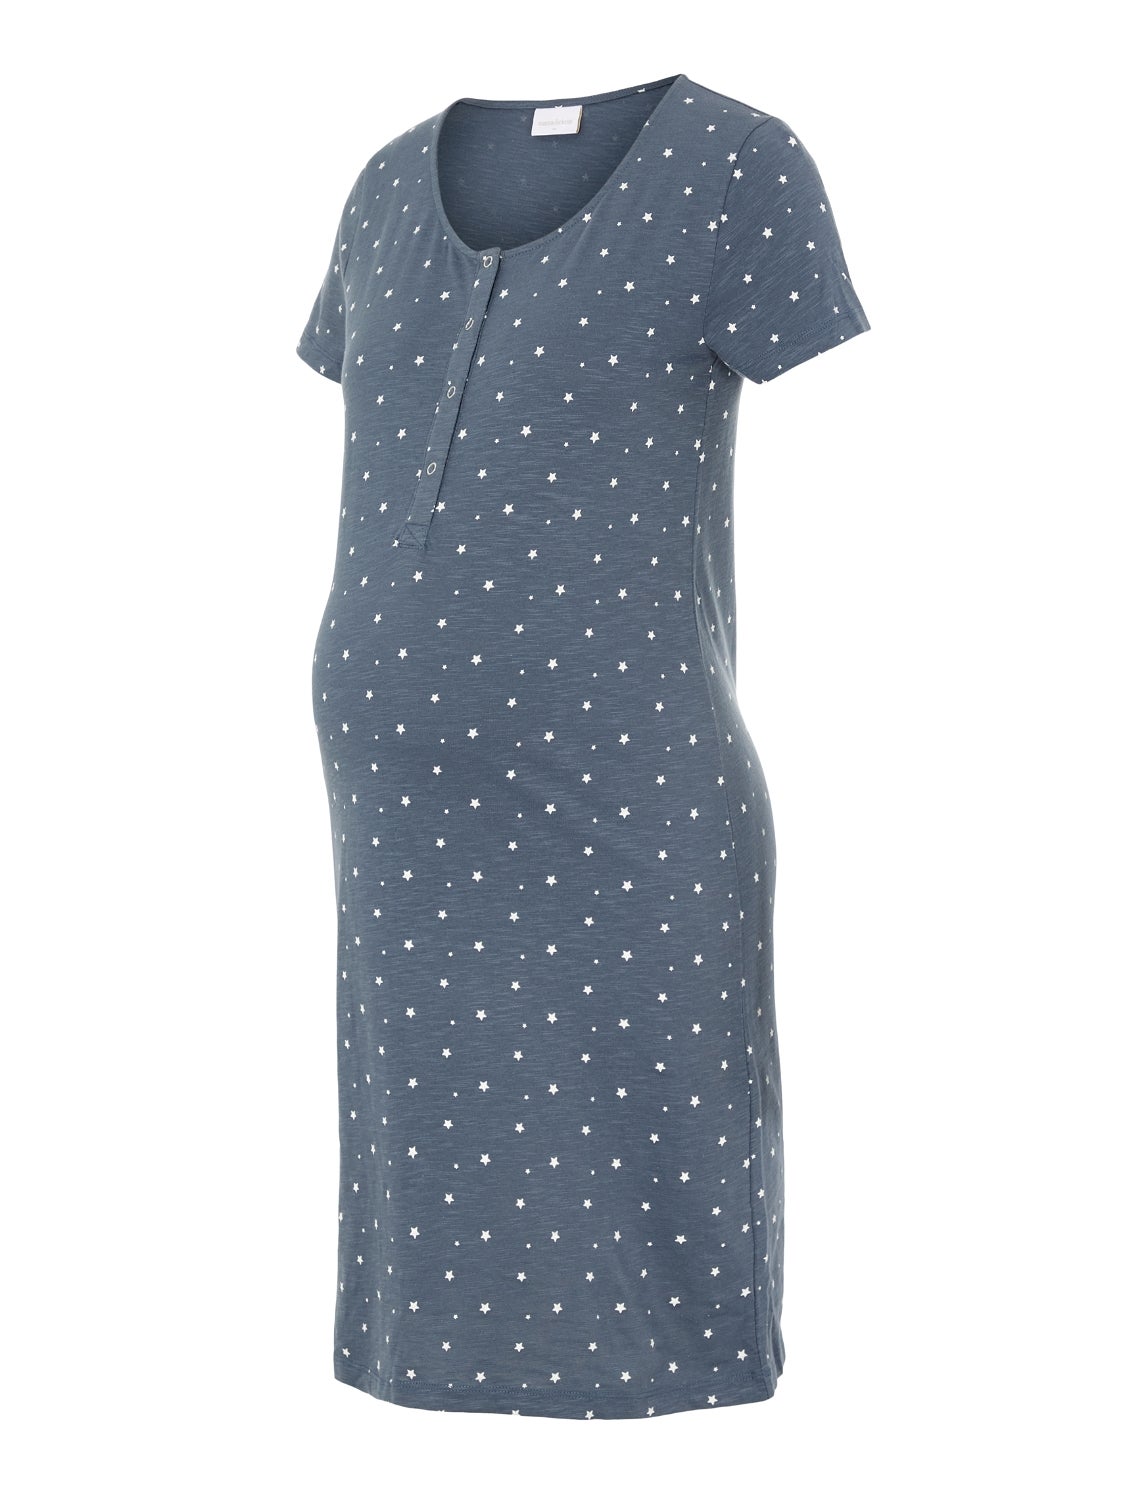 Mamalicious Maternity star print nightdress with nursing function in  charcoal grey